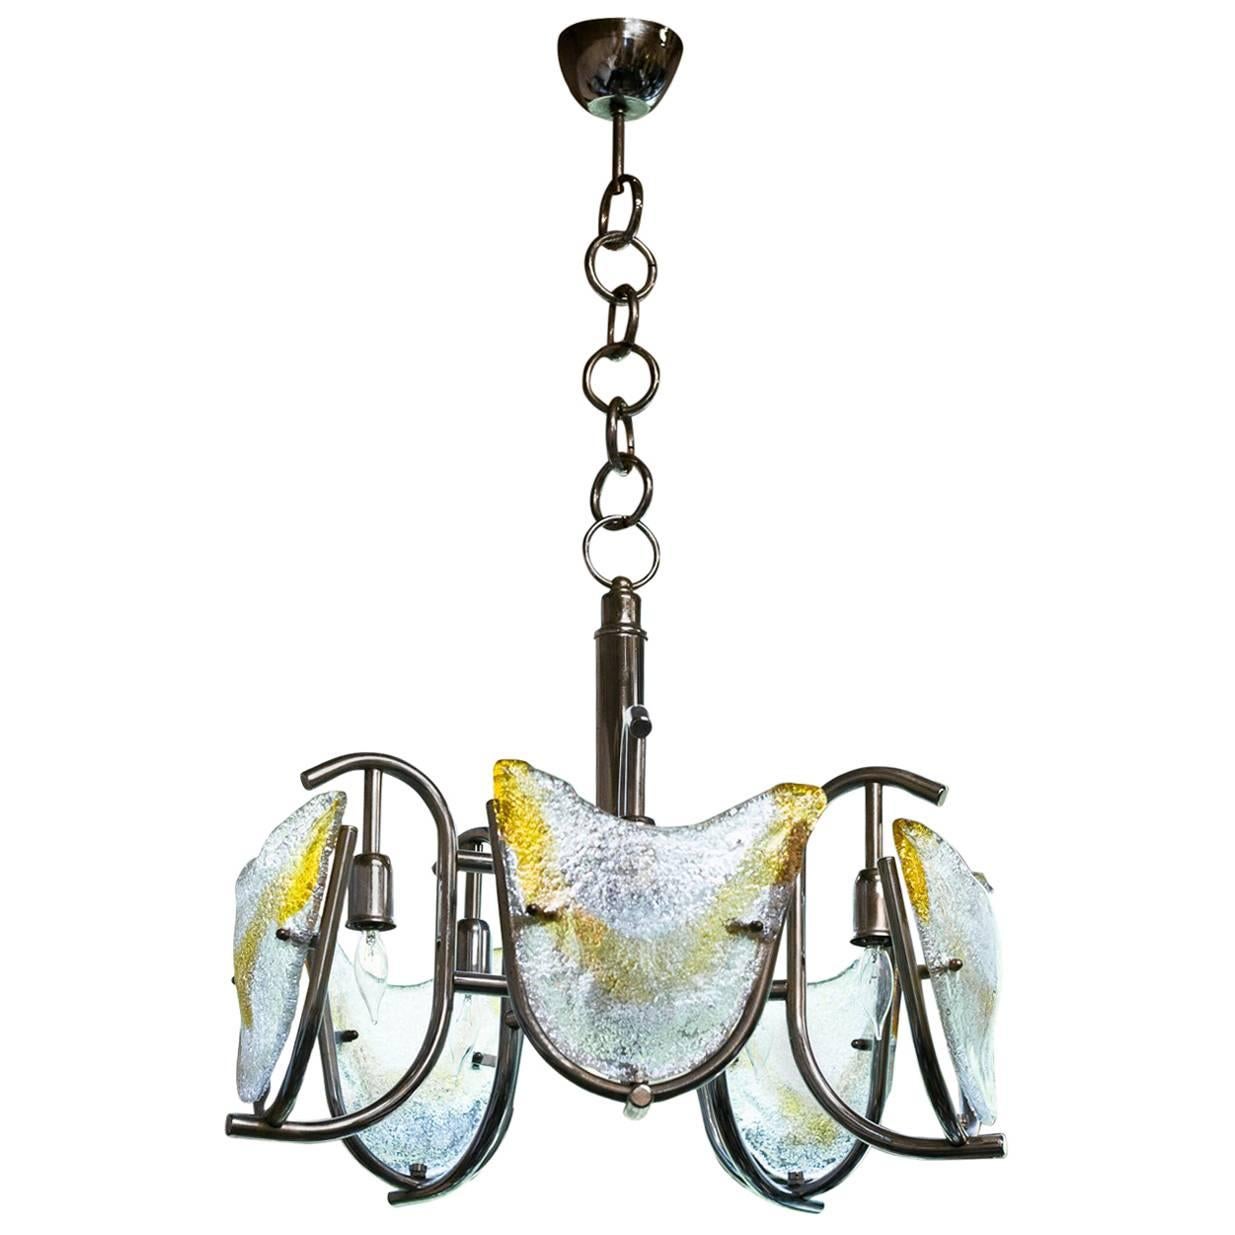 Italian Midcentury Mazzega/Murano Chandelier with Chrome Frame and Amber Glass